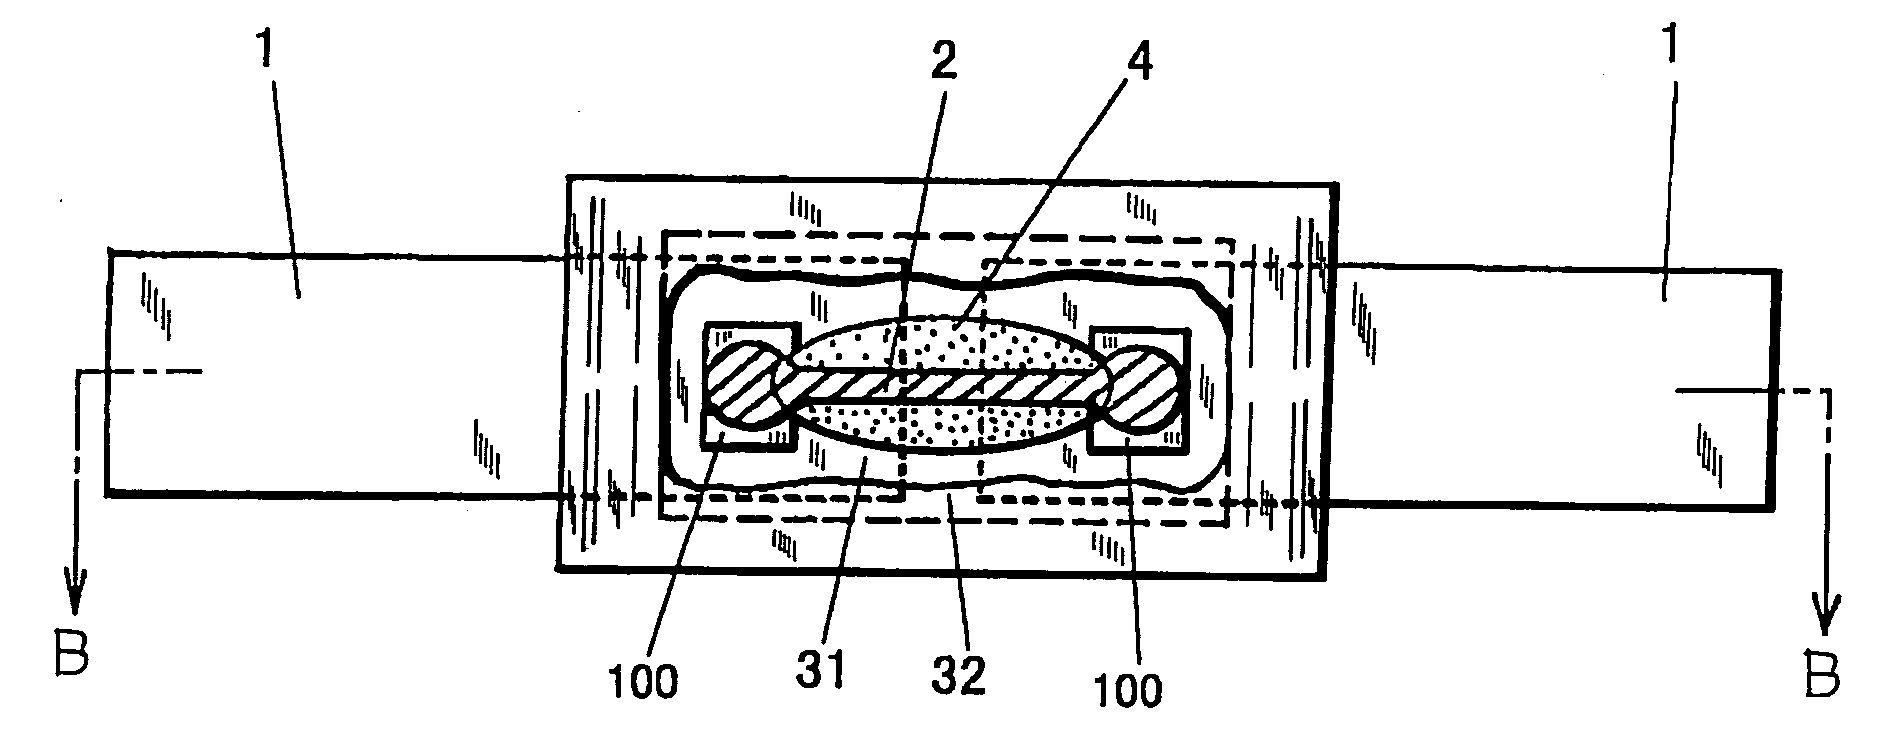 Thermal fuse having a function of a current fuse